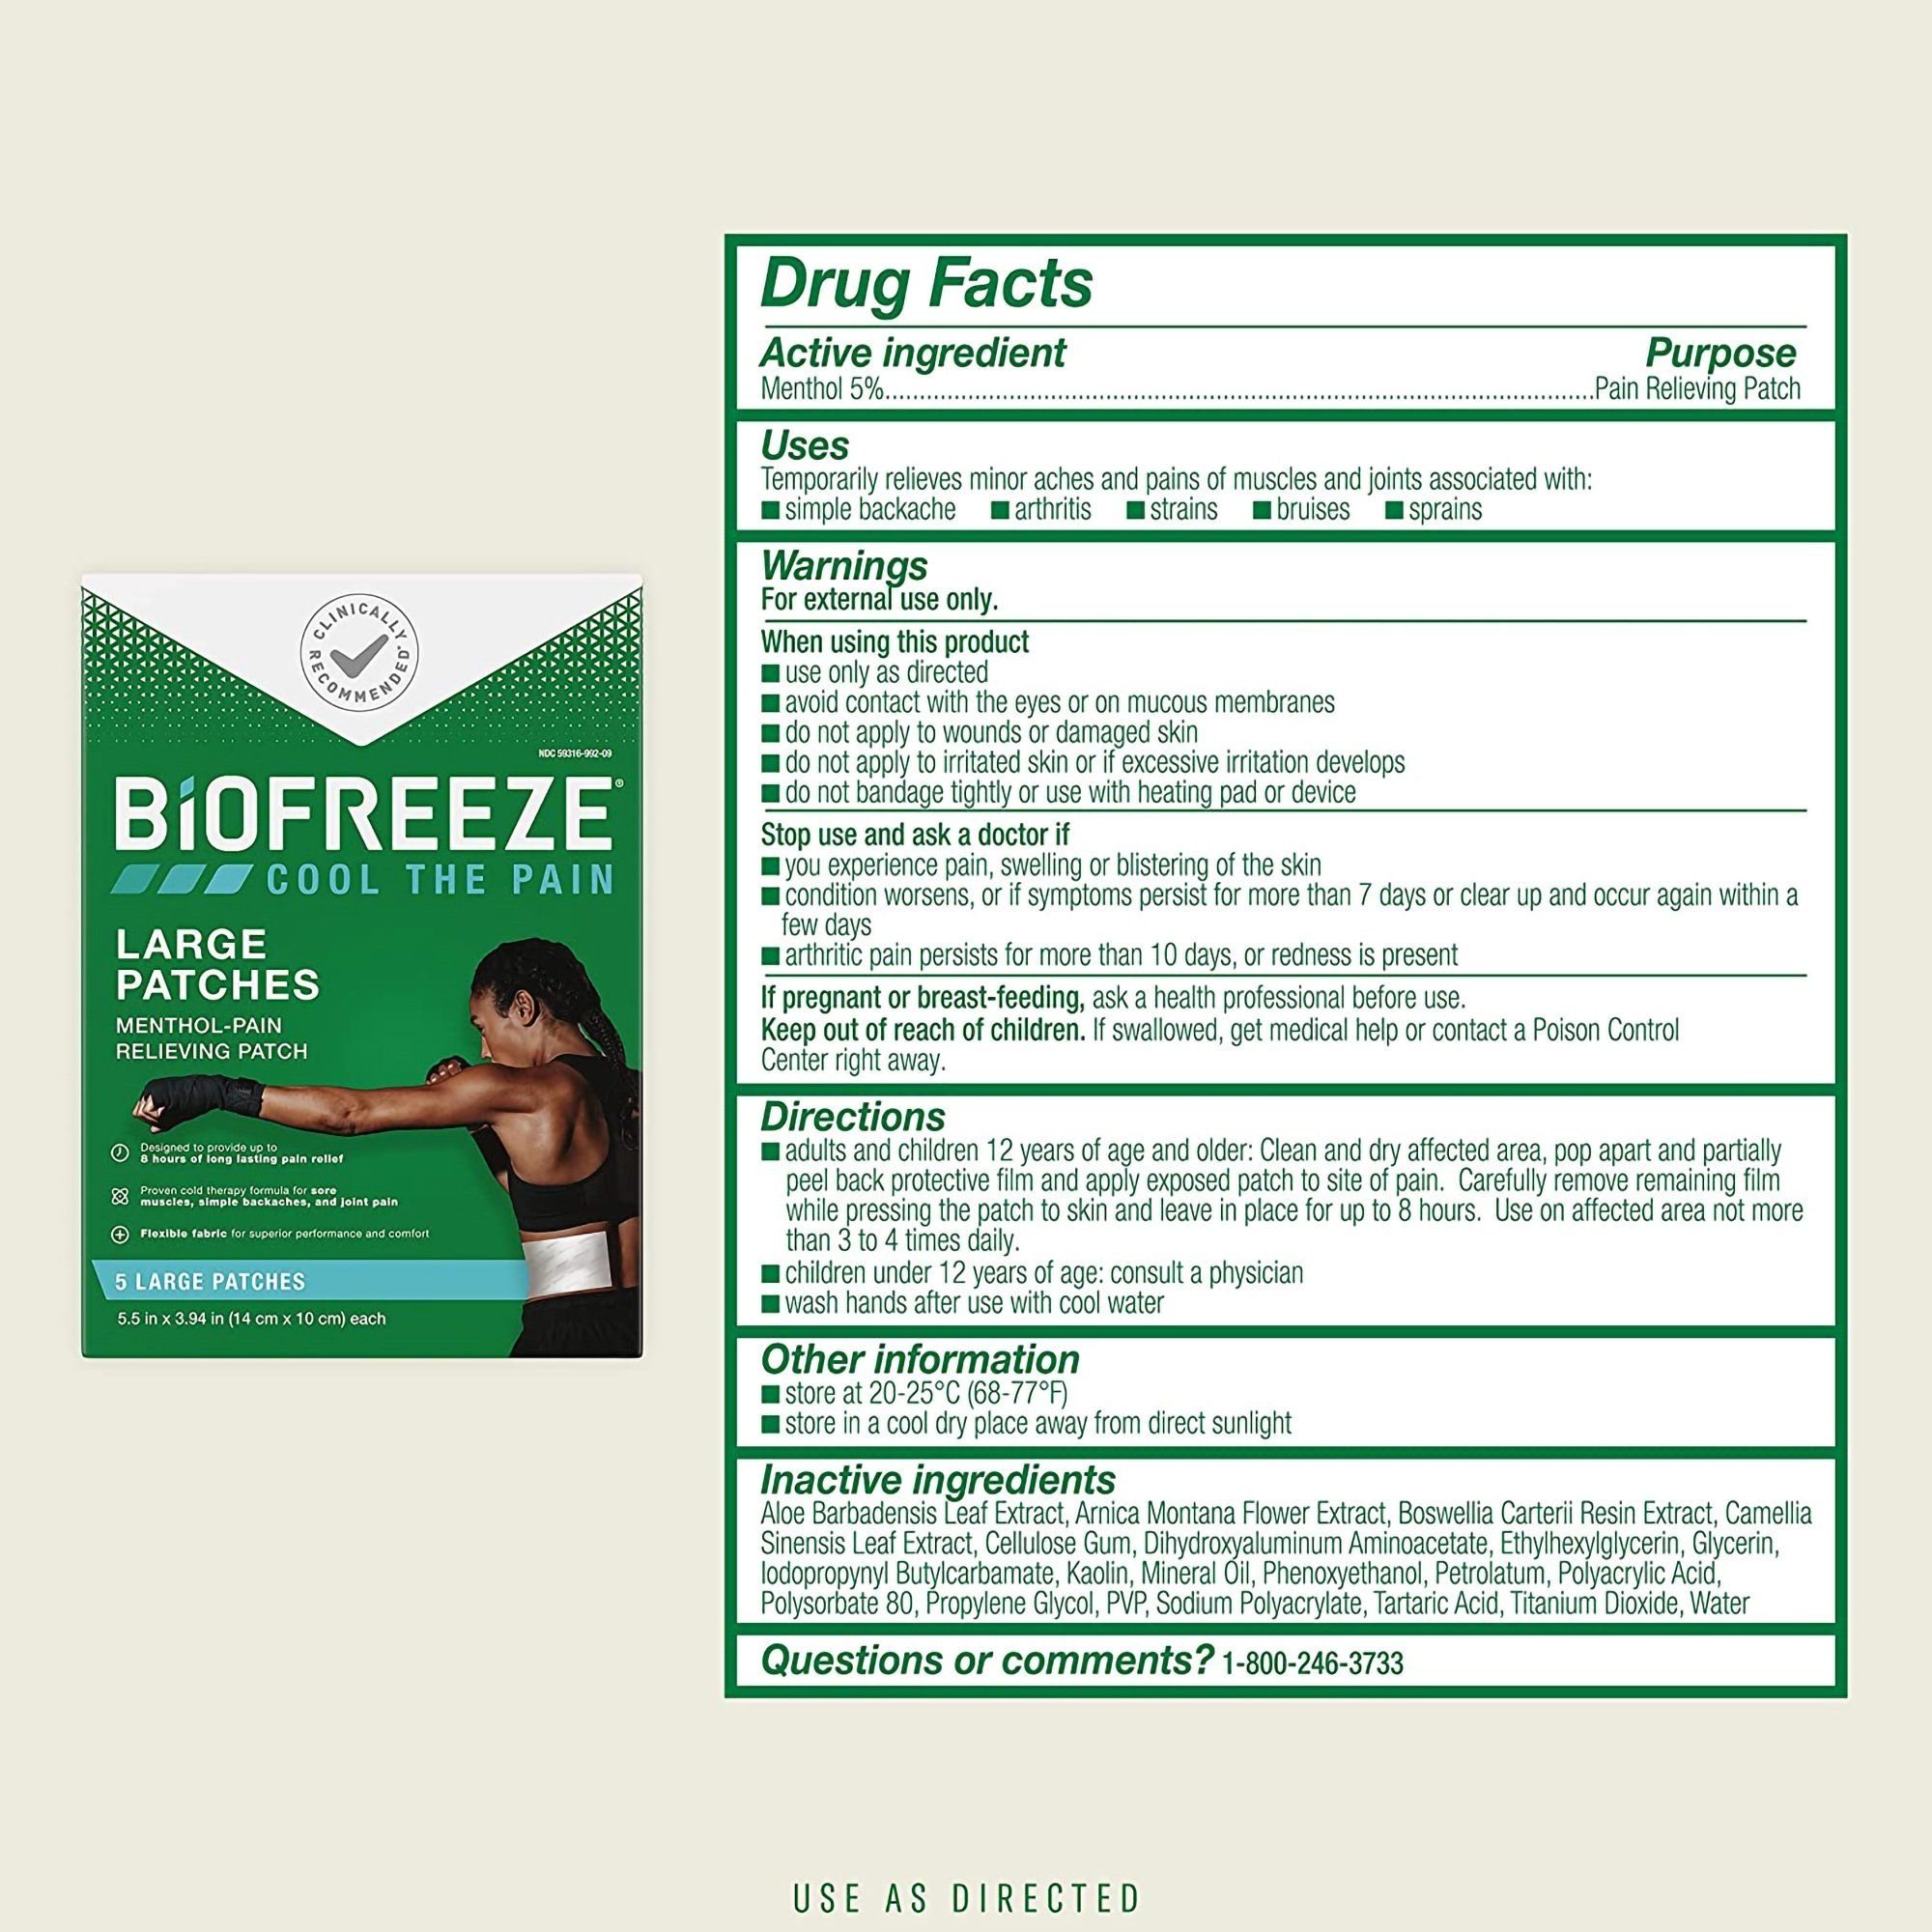 Biofreeze Pain Relief Patch, Large - 5 patches